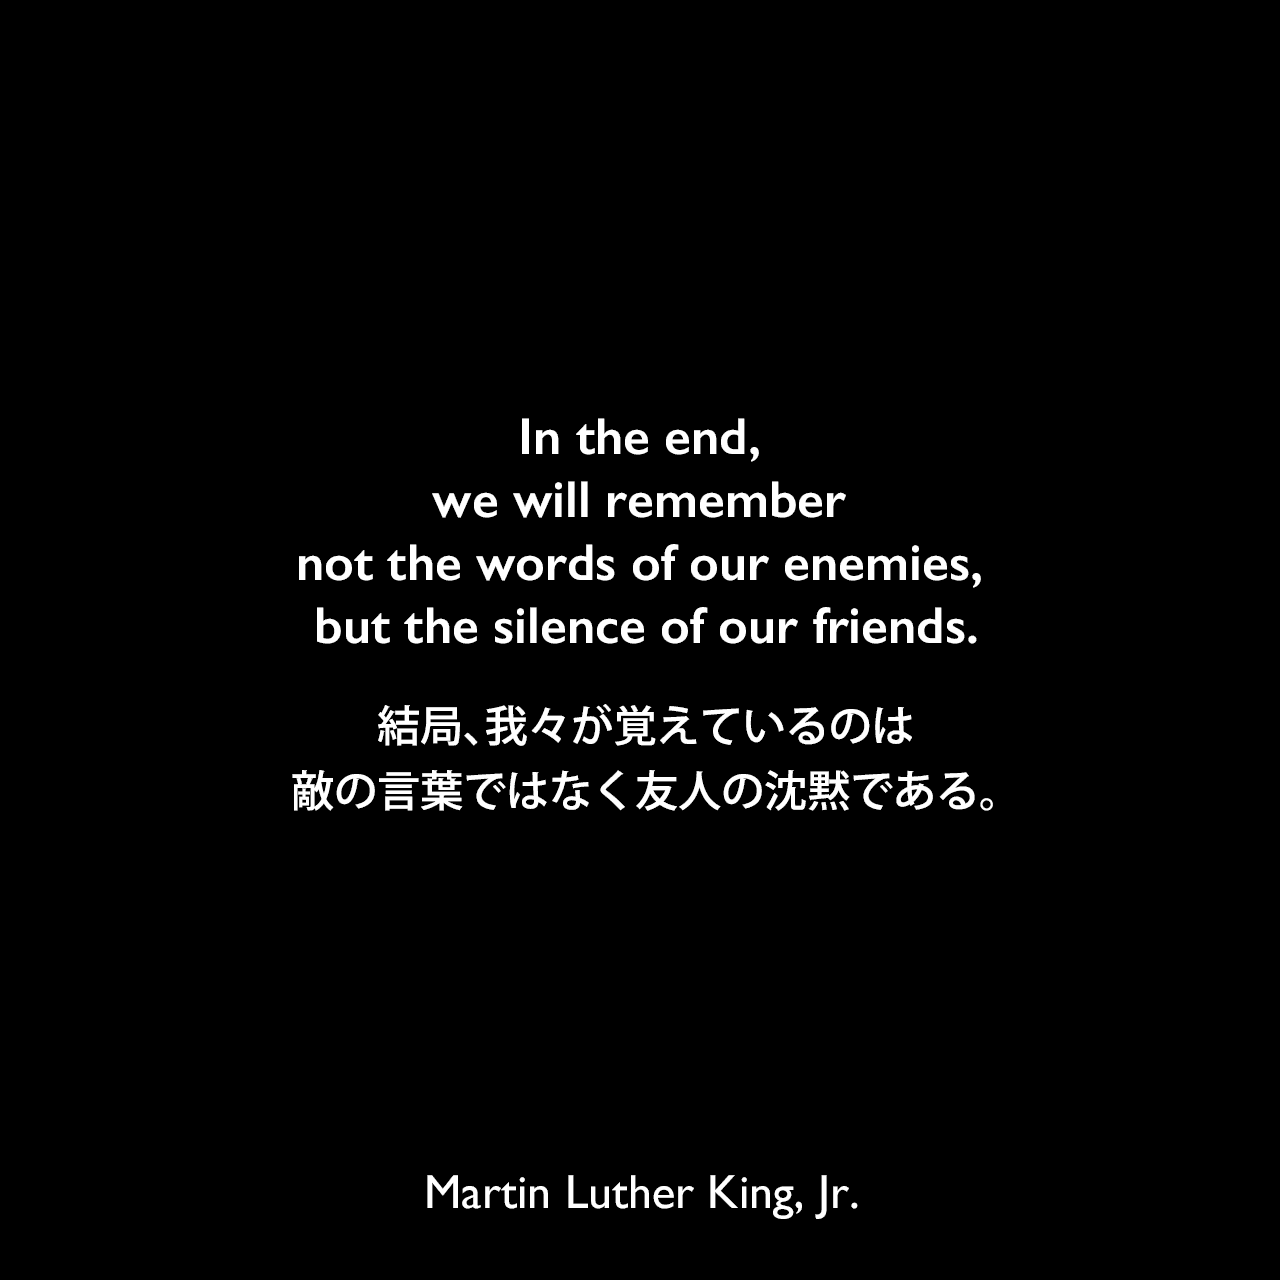 In the end, we will remember not the words of our enemies, but the silence of our friends.結局、我々が覚えているのは、敵の言葉ではなく友人の沈黙である。- 1967年のレクチャー「The Trumpet of Conscience」よりMartin Luther King, Jr.